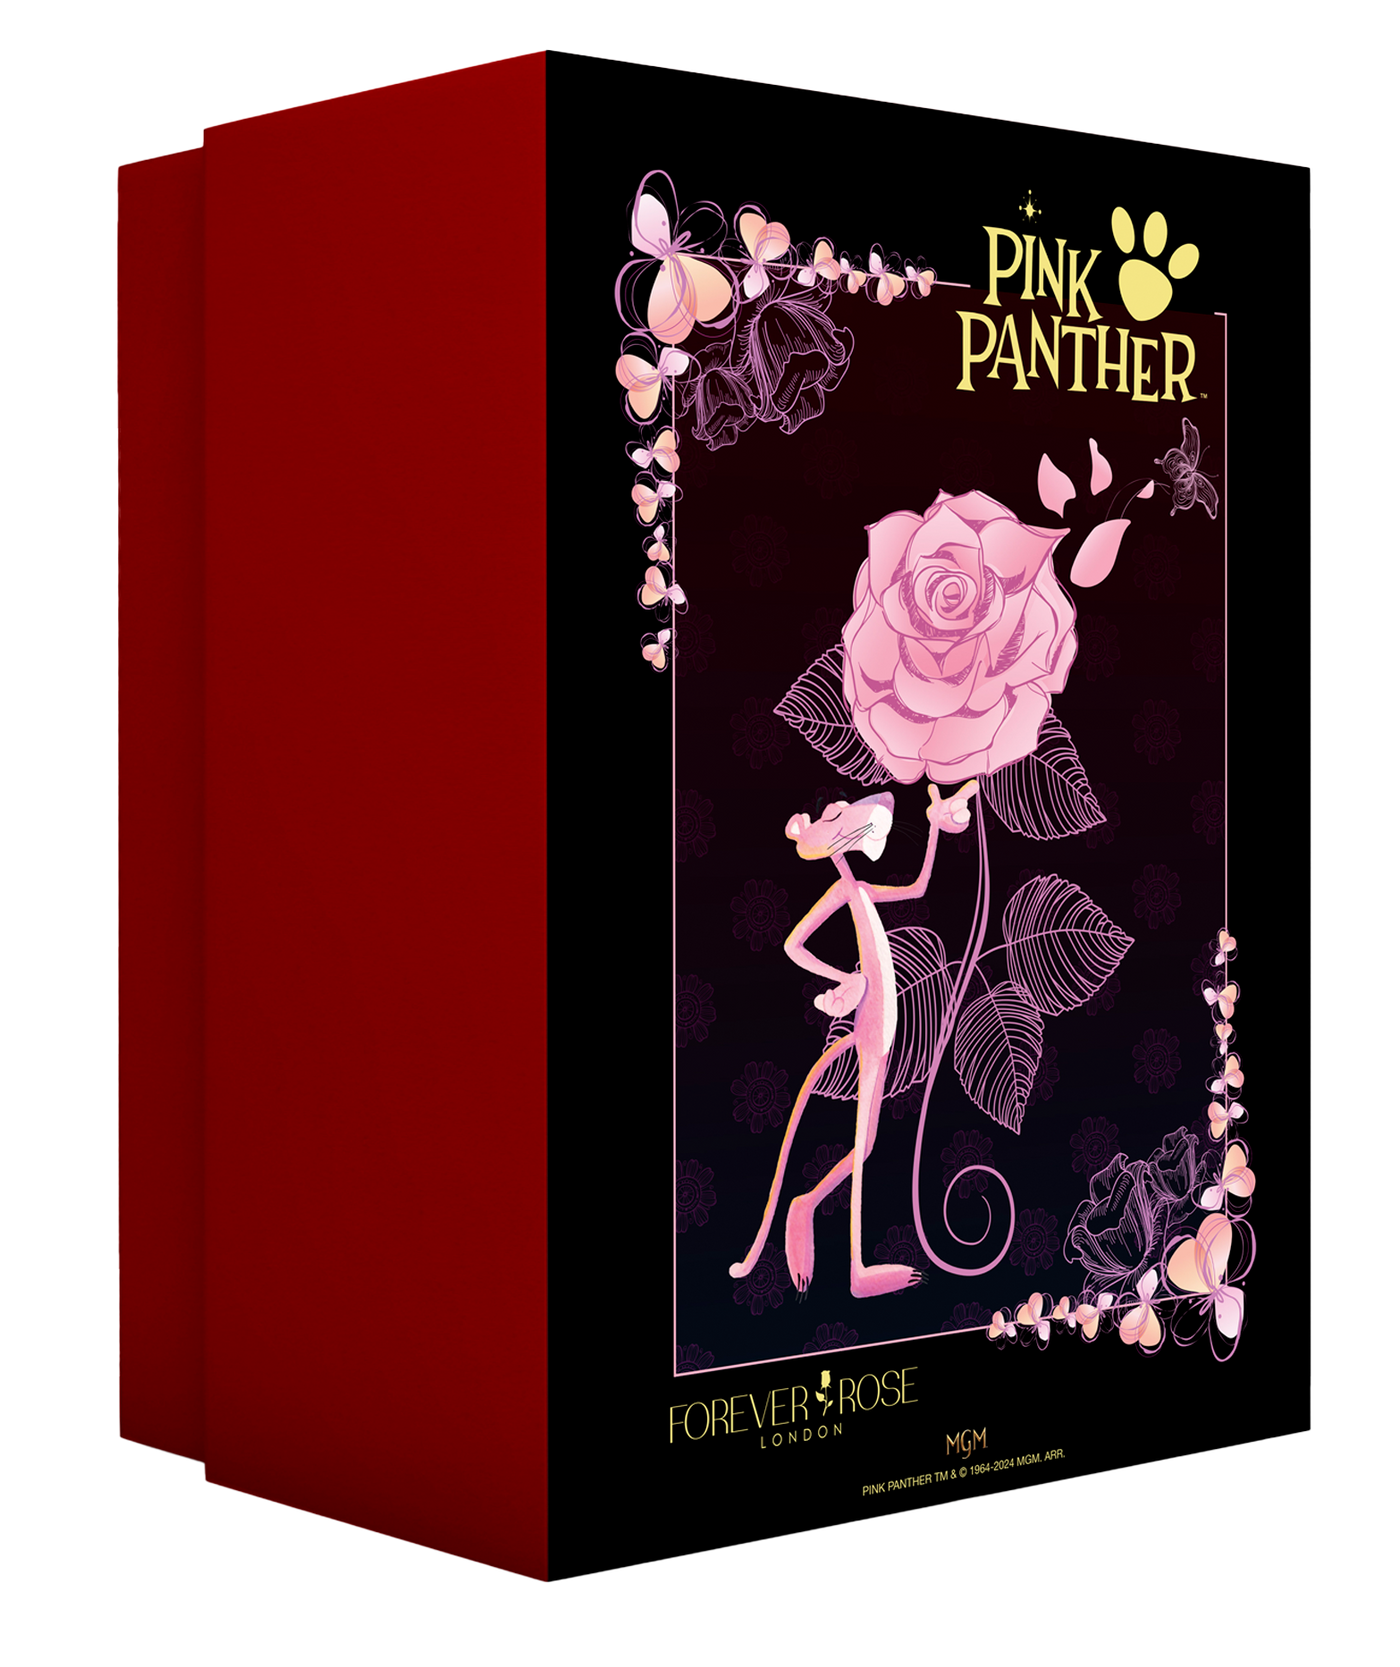 Pink Panther Bella - Limited Edition